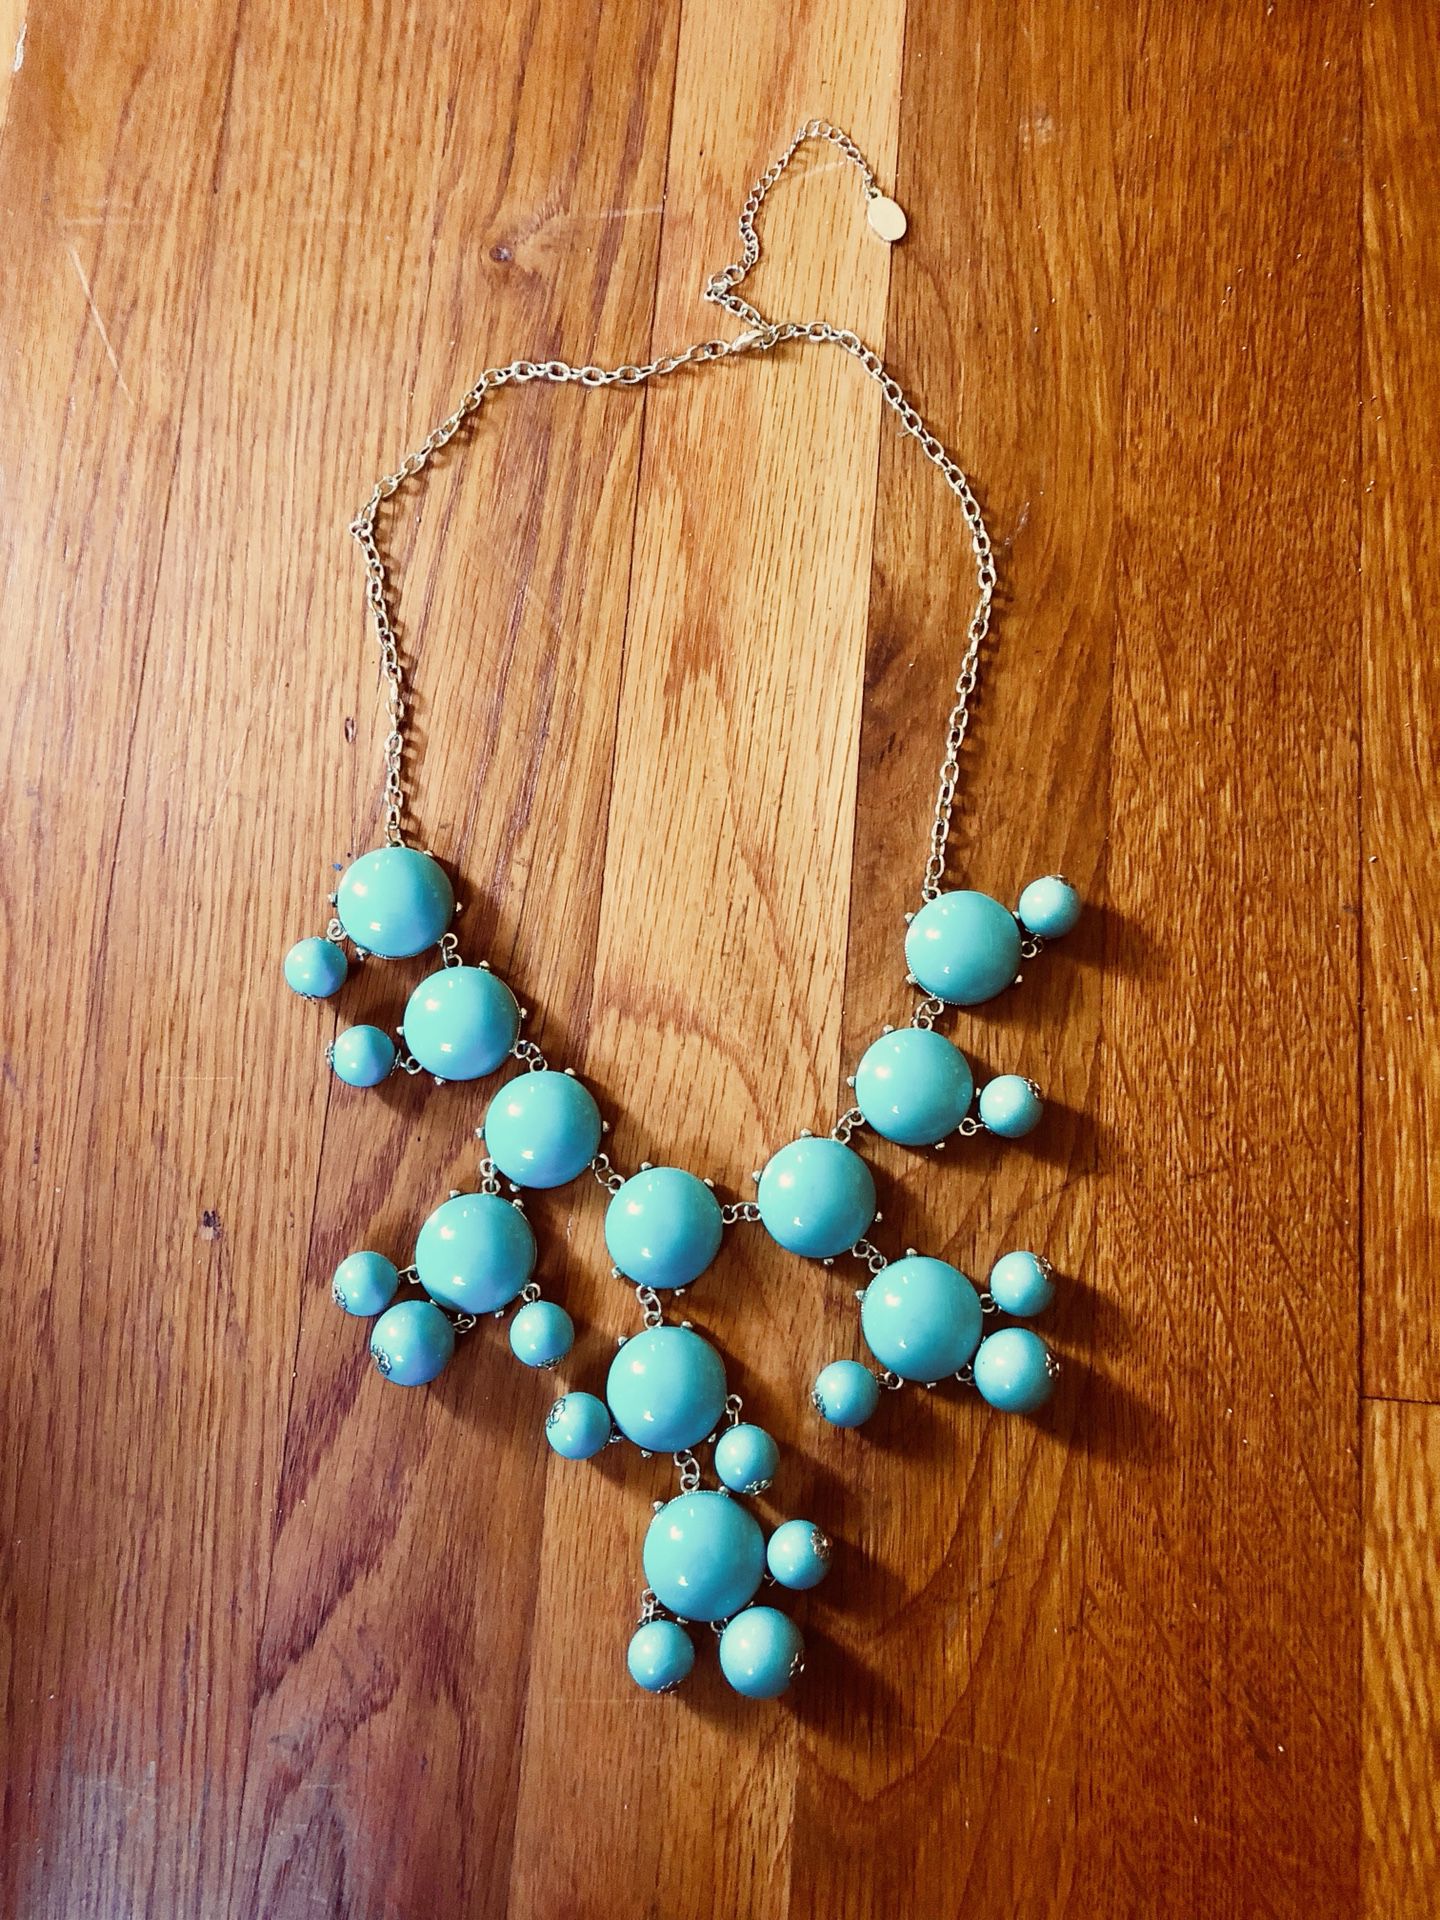 Turquoise colored necklace